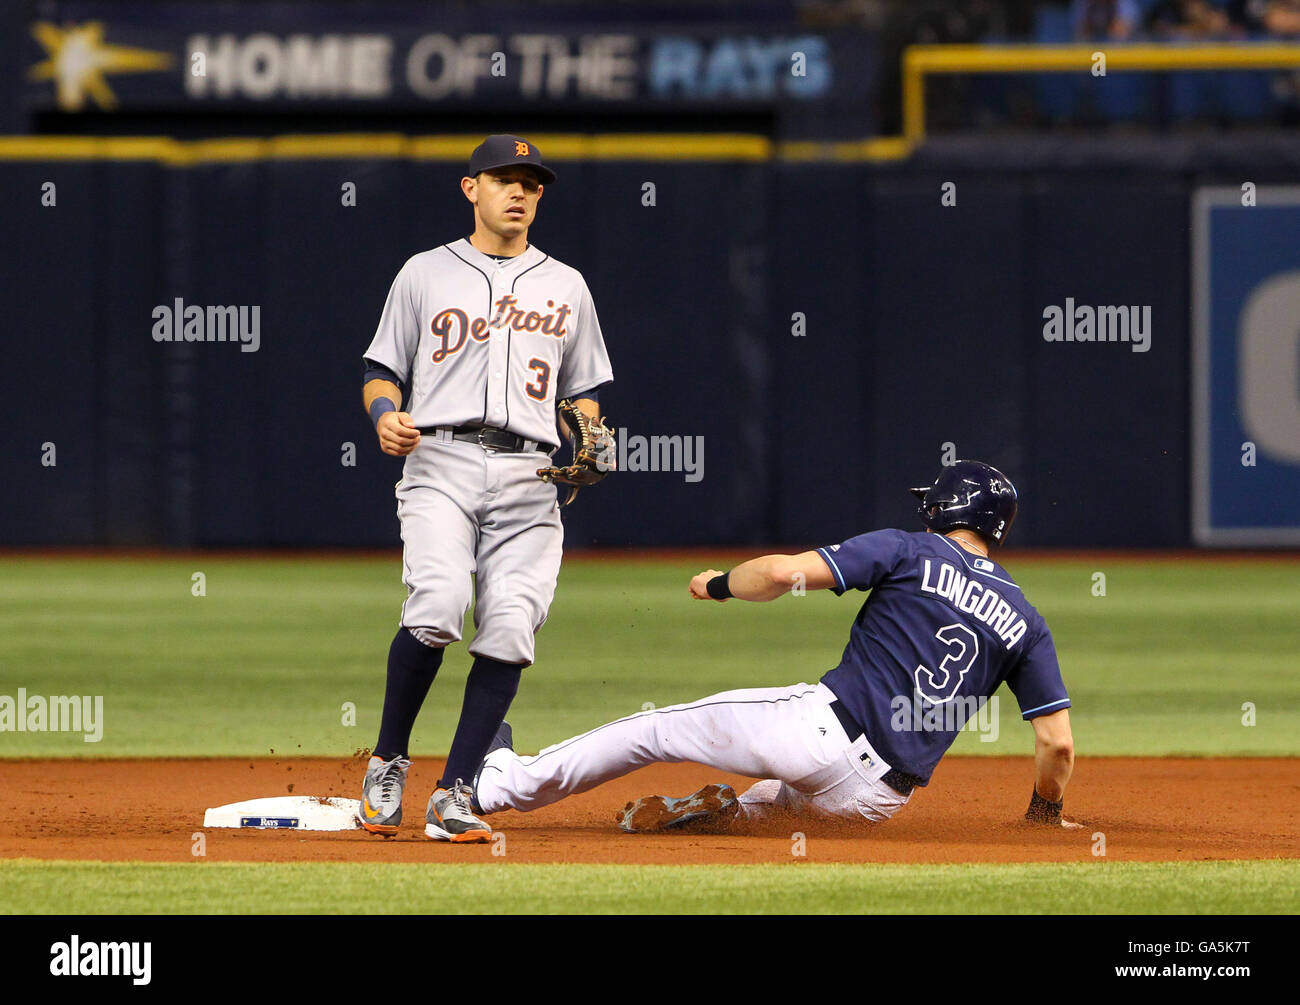 St. Petersburg, Florida, USA. 30th June, 2016. WILL VRAGOVIC | Times.Tampa Bay Rays third baseman Evan Longoria (3) advances to second on a wild pitch by Detroit Tigers starting pitcher Jordan Zimmermann (27) in the first inning of the game between the Detroit Tigers and the Tampa Bay Rays in Tropicana Field in St. Petersburg, Fla. on Thursday, June 30, 2016 © Will Vragovic/Tampa Bay Times/ZUMA Wire/Alamy Live News Stock Photo